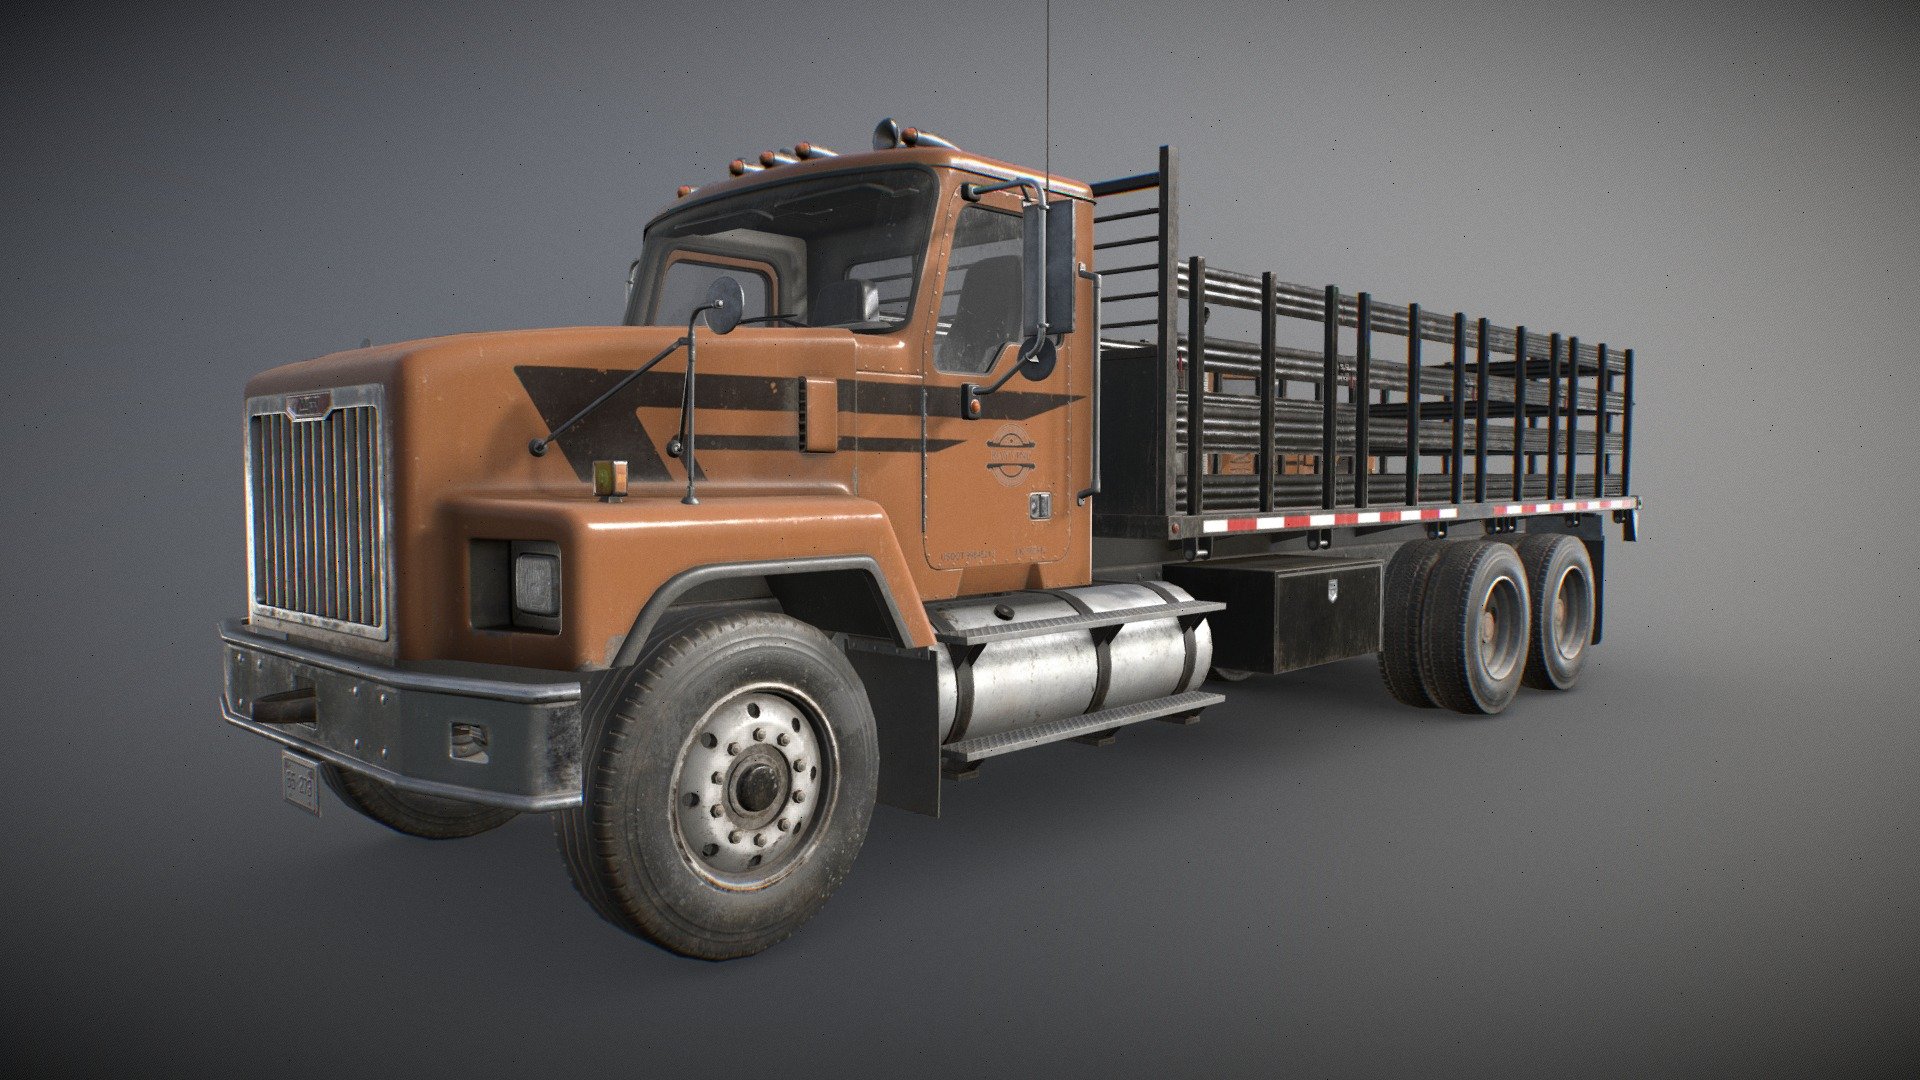 Low Poly generic Classic Flatbed Truck 3D model:




Real-world scale and centered.

Doors, wheels, steering wheel, and flatbed barrier are separated and can be easily removed or rigged/animated (model not animated)

Interior is a separate object to detach if needed

2 versions included: With flatbed barrier and without

All branding and labels are custom made

Model also compatible with other &ldquo;Classic Truck